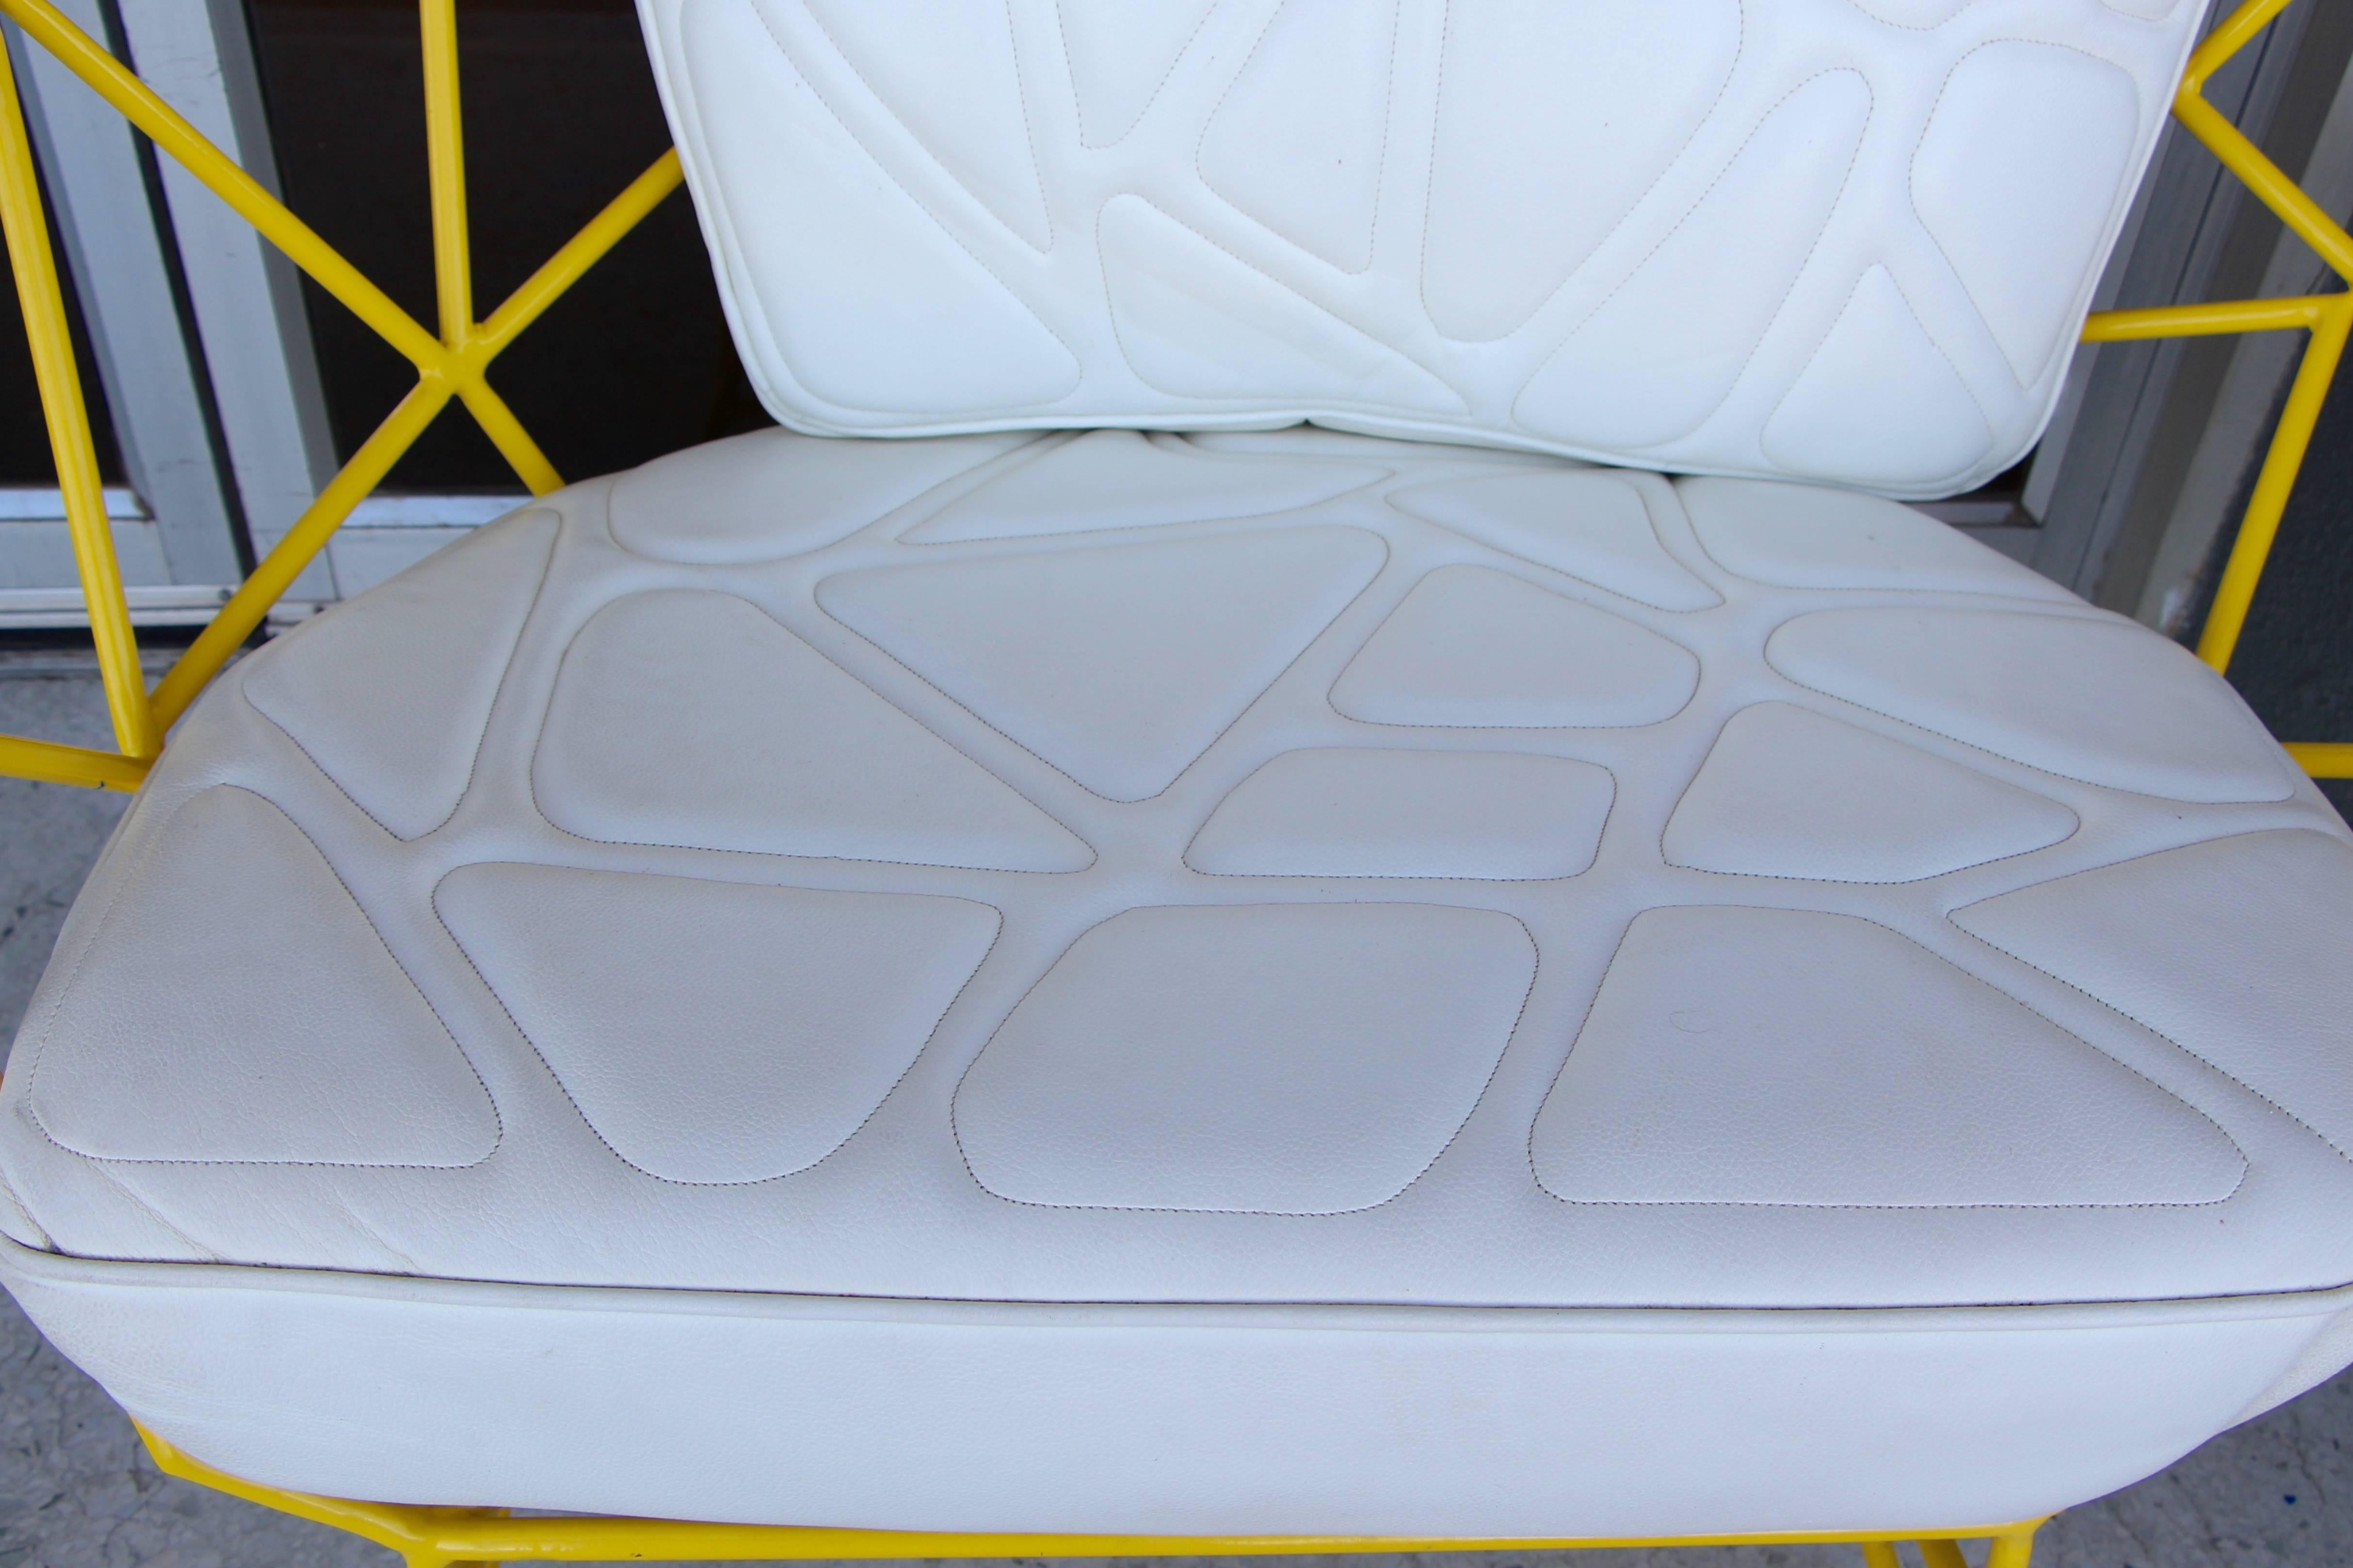 A pretty fabulous handmade artisan chair with a most unique stylized stitched geometric cushions. The chair is powder coated in a lovely yellow color. The leather cushions are in good condition, although they show some wear from use and age. A mate